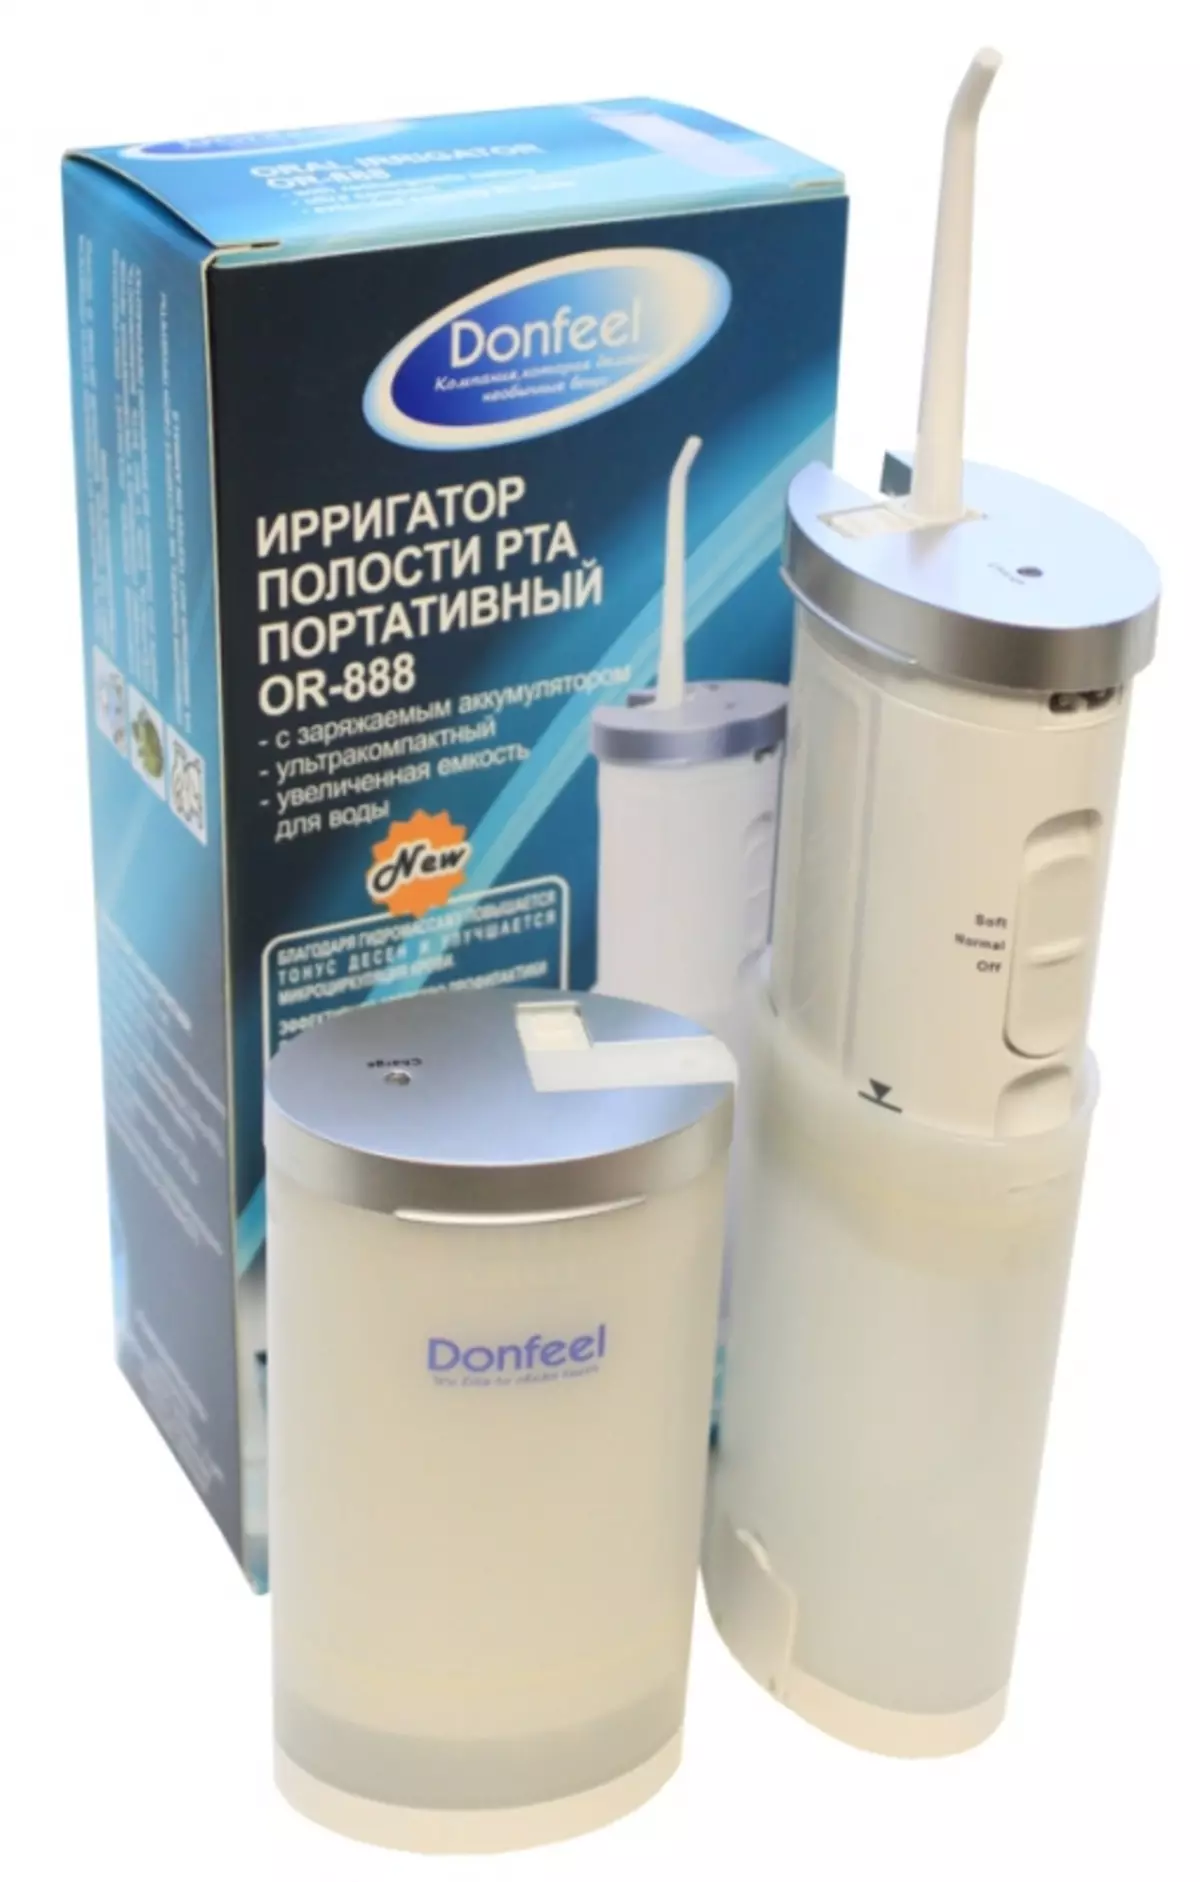 DONFEEL irrigators: OR-830 ​​and OR-840 AIR, OR-820D Compact and OR-888, OR-800, OR-350 and OR-820D, OR-850 and OR-320 23975_12